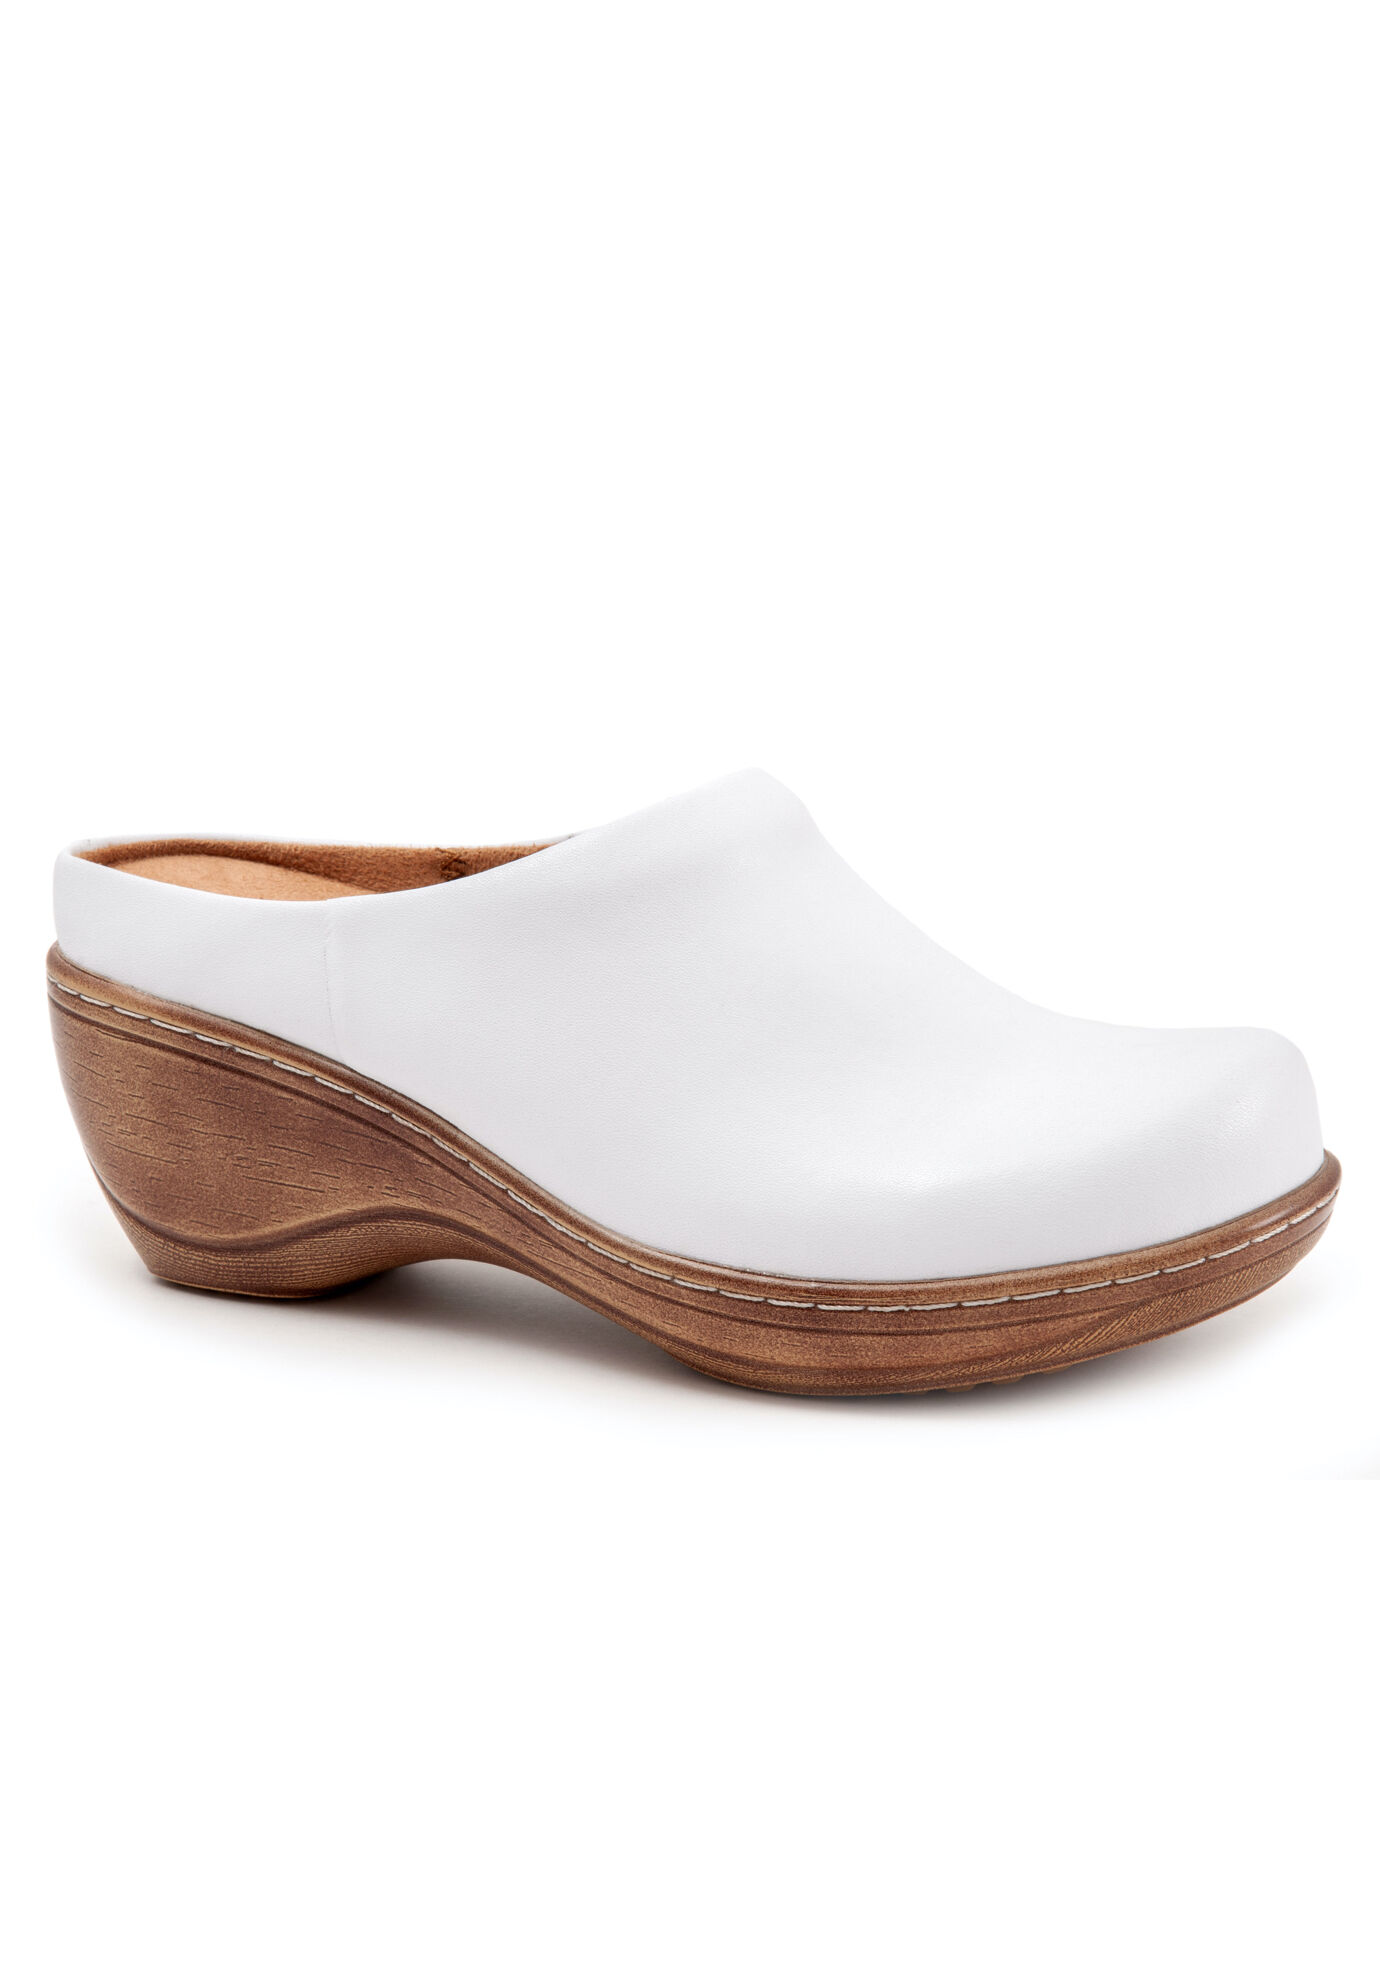 Extra Wide Width Women's Madison Clog by SoftWalk in White (Size 10 WW)